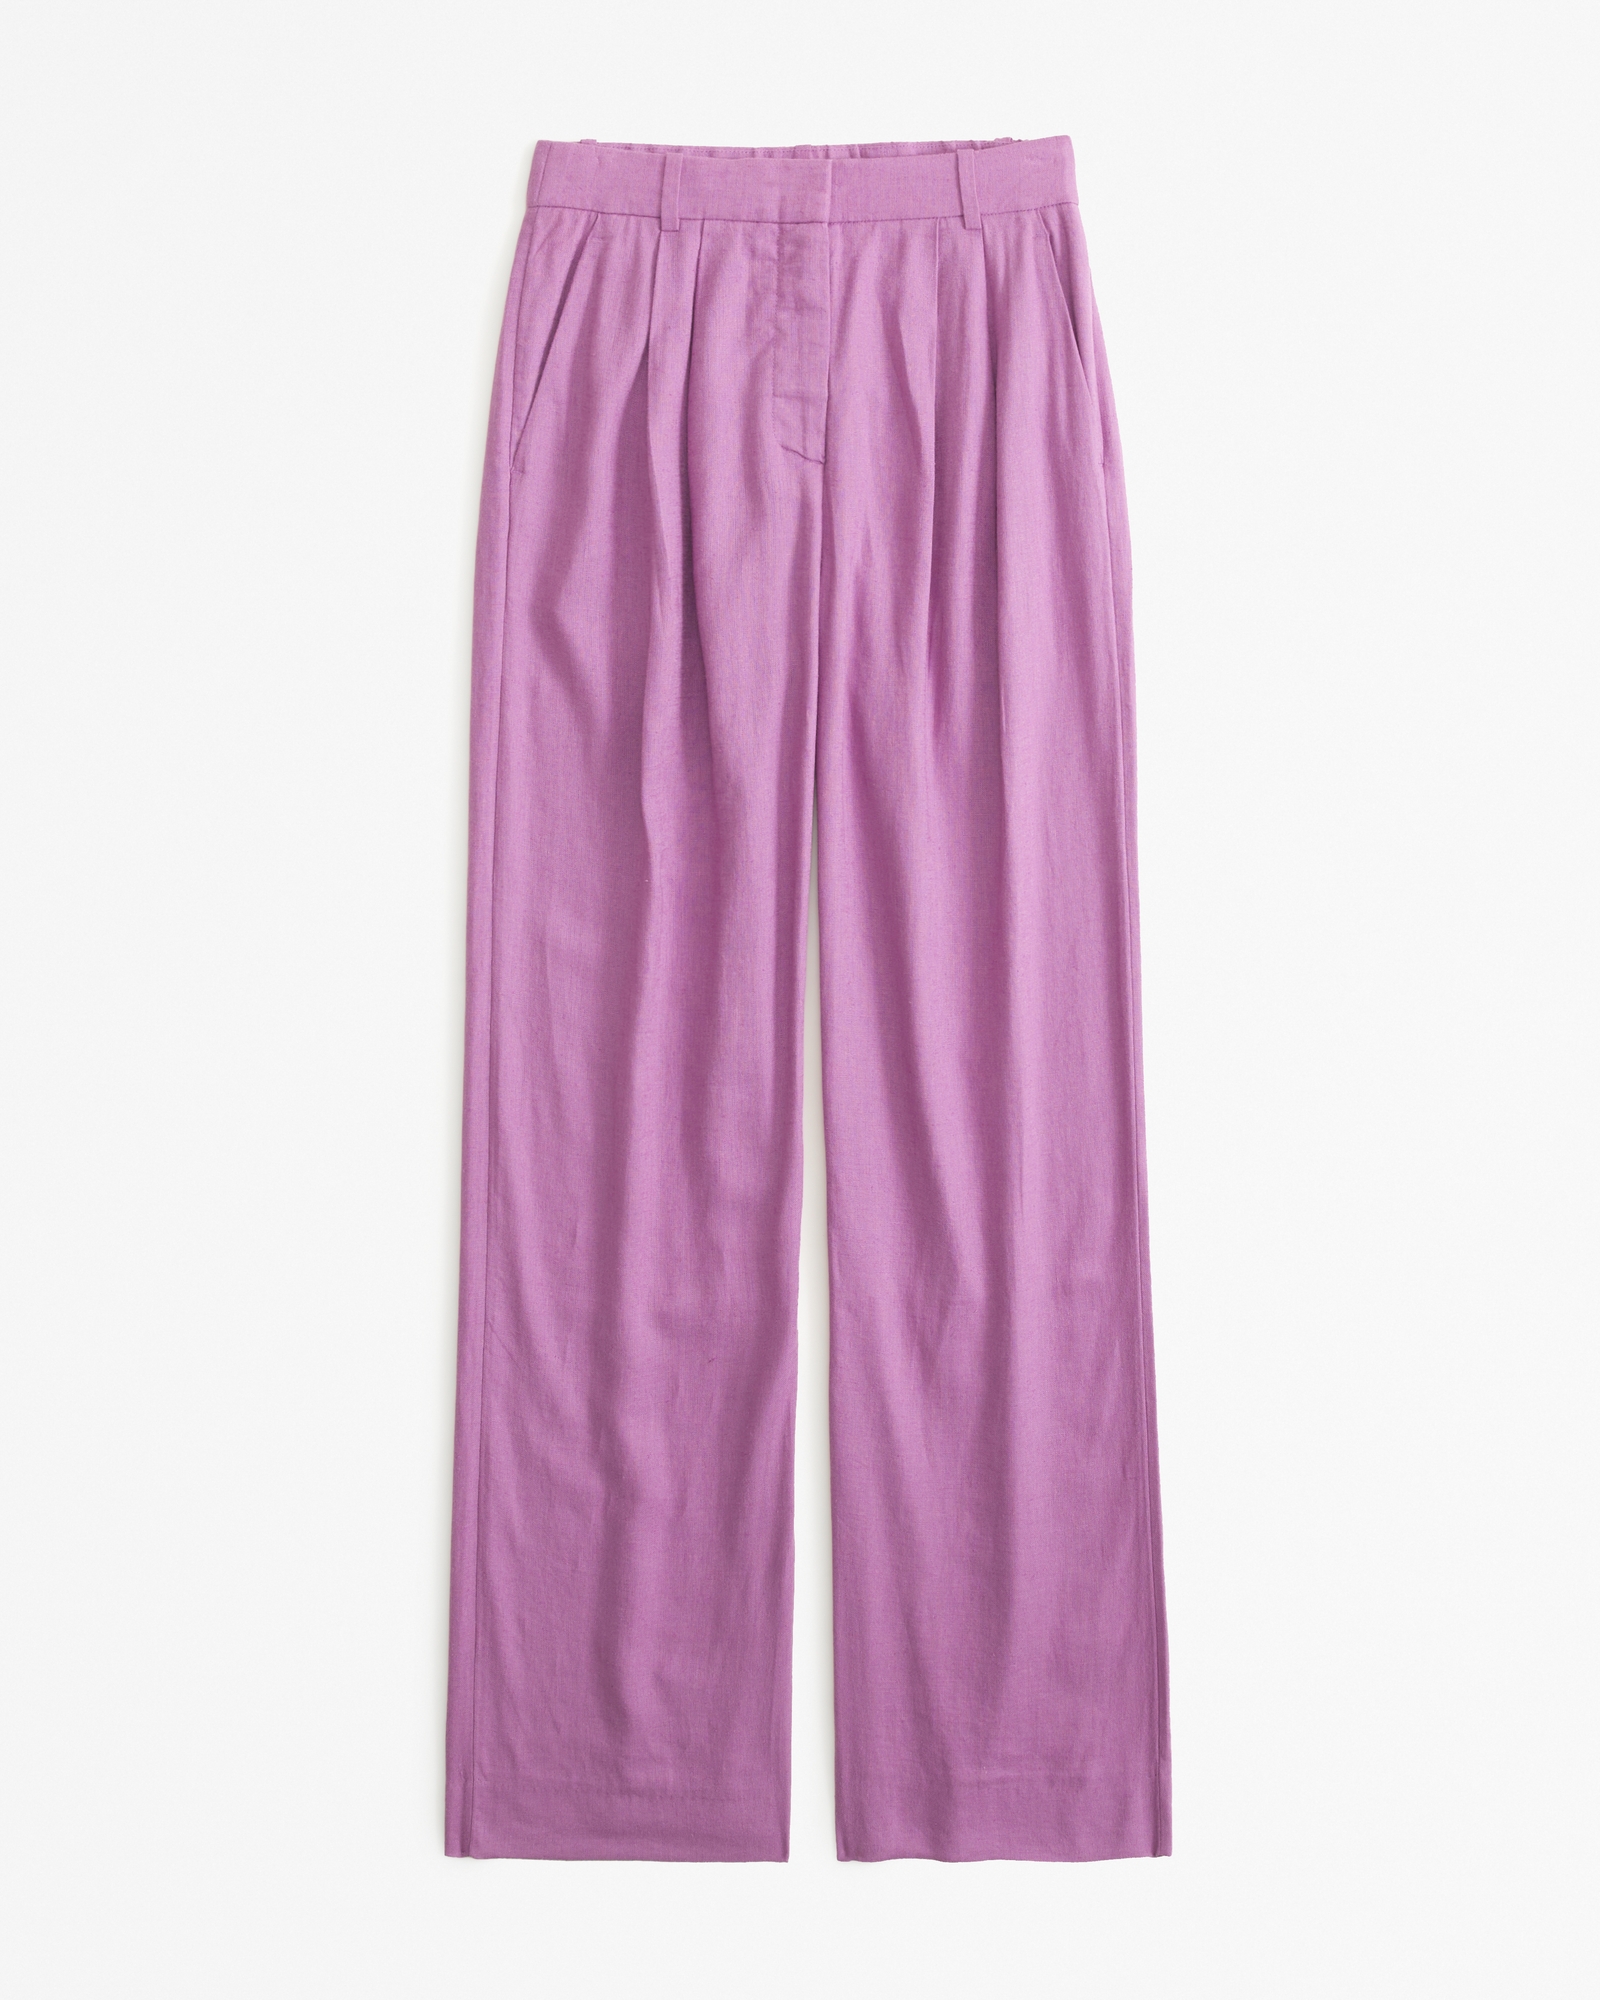 Women's Curve Love A&F Sloane Tailored Pant